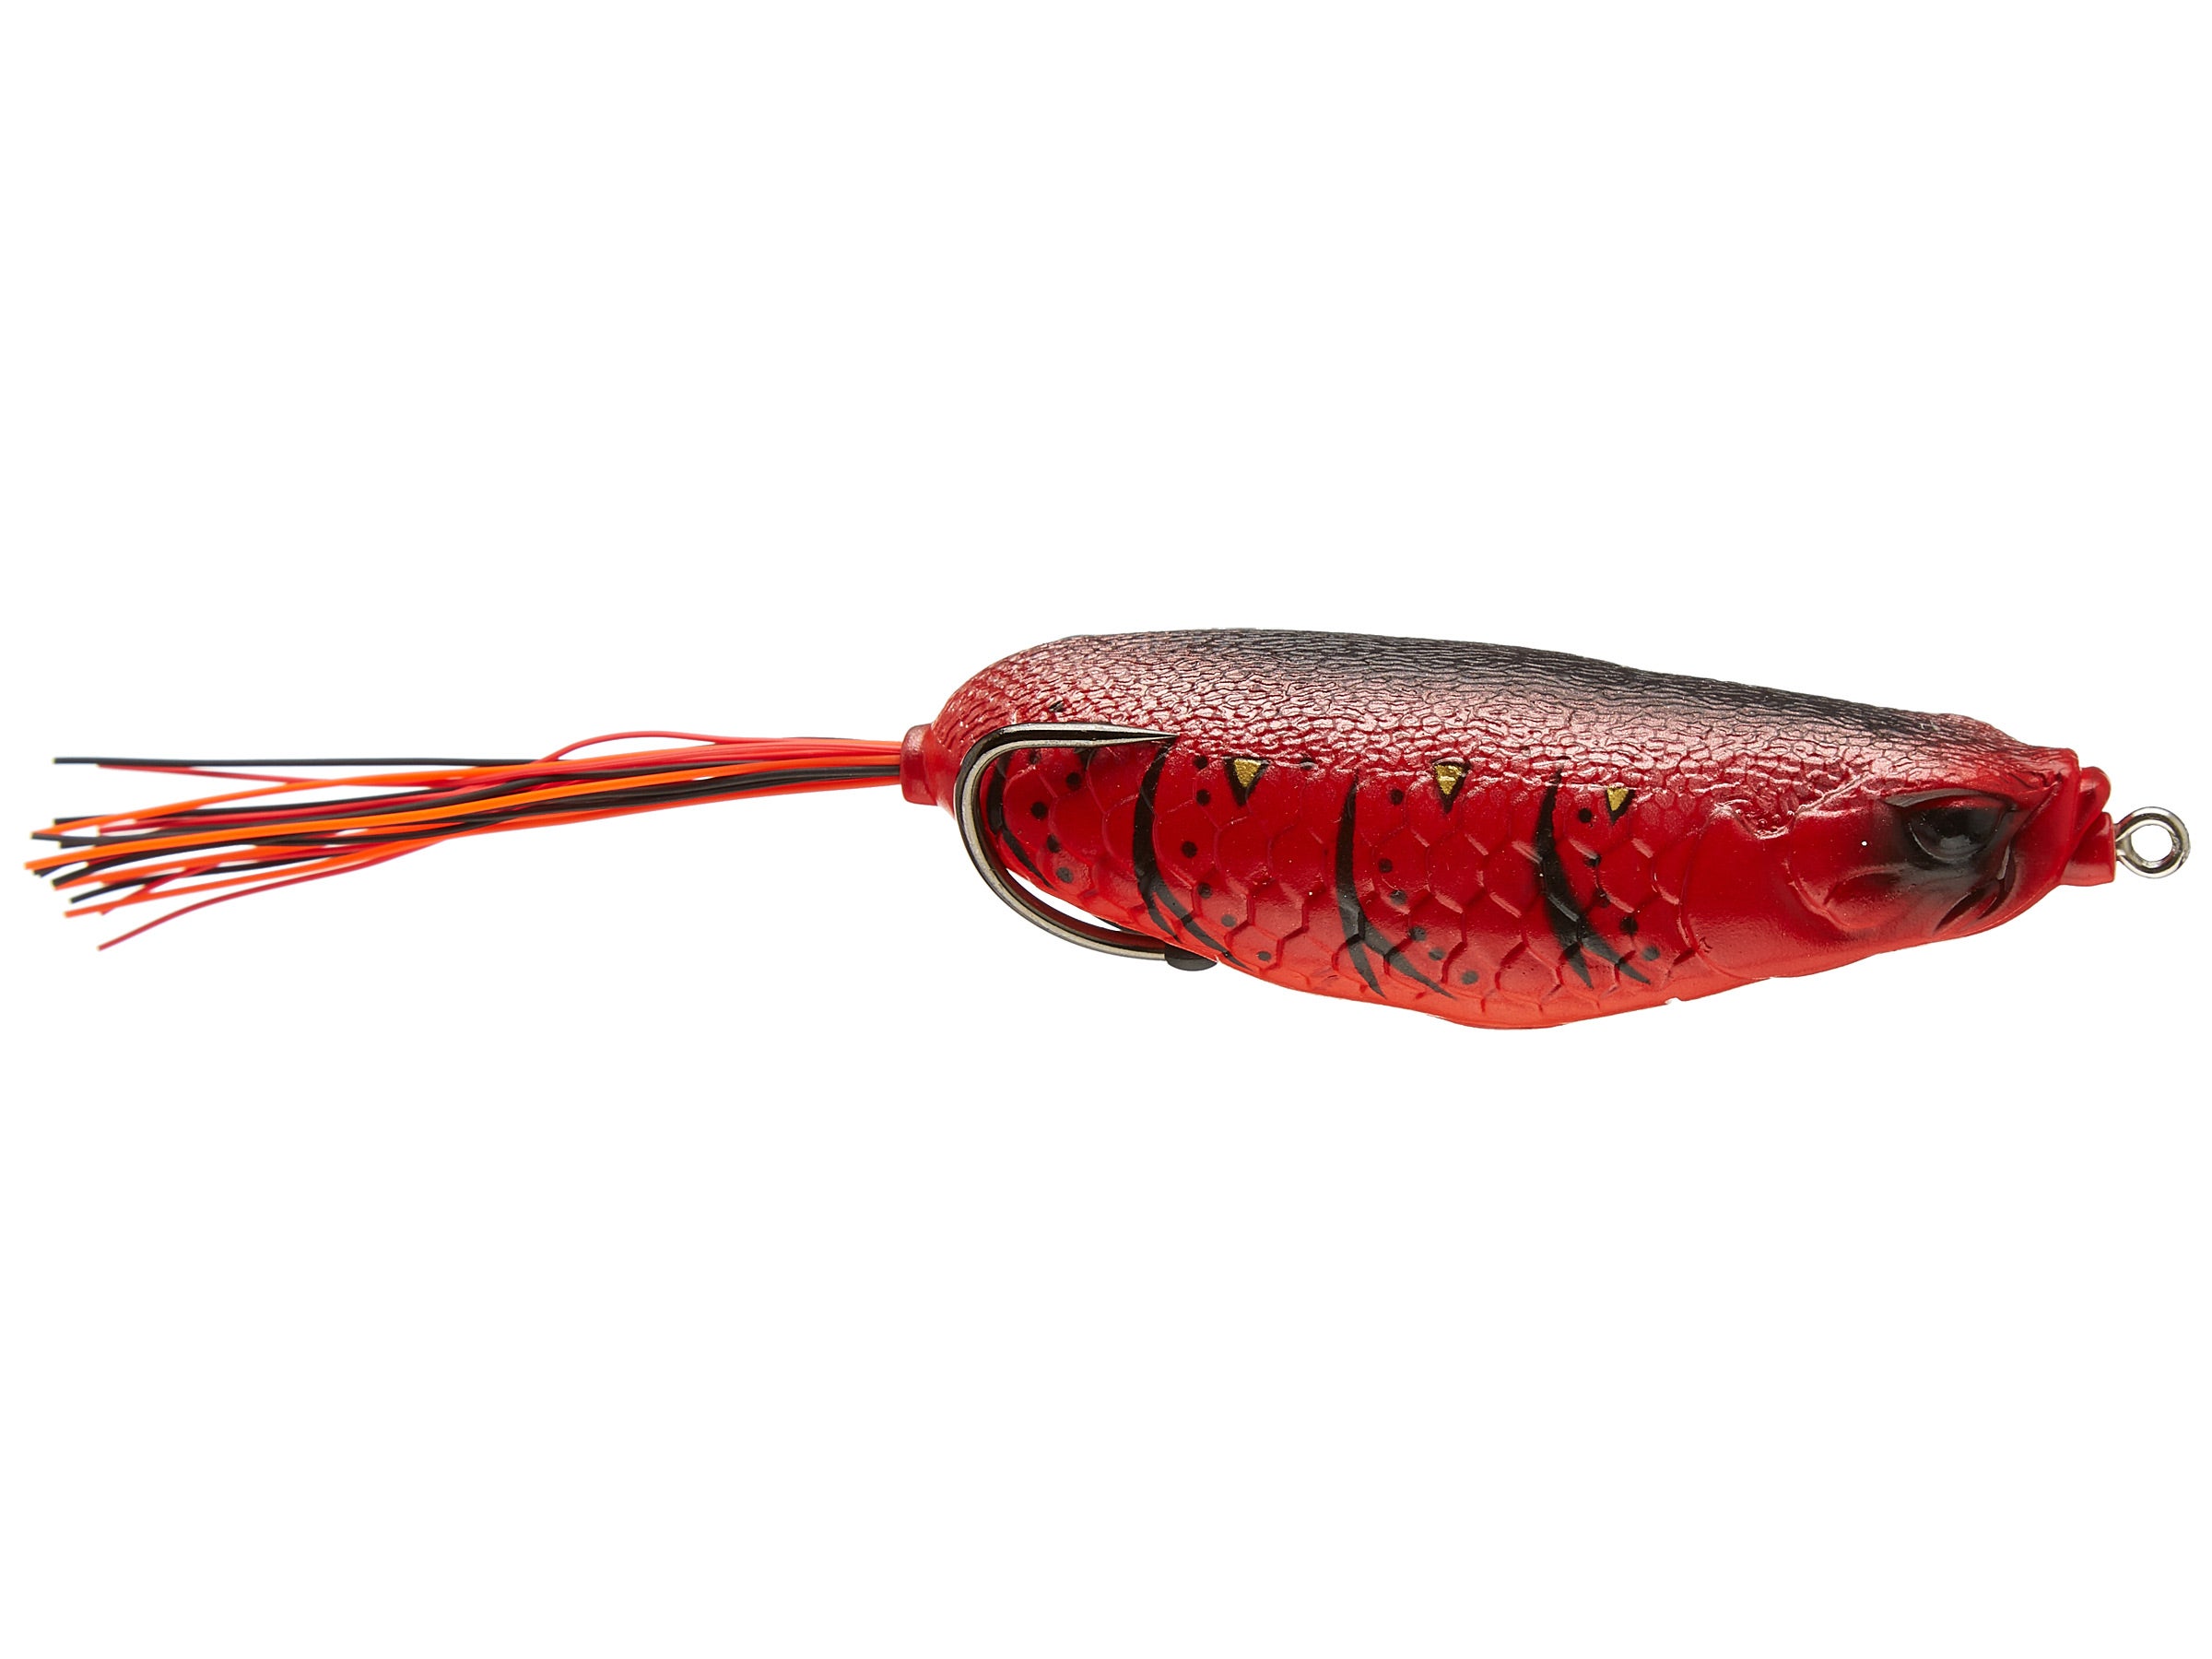 WCC Red Craw SNFR90-59 3/4oz 3-1/2" Molix Sneaky Frog Topwater Fishing Lure #59 